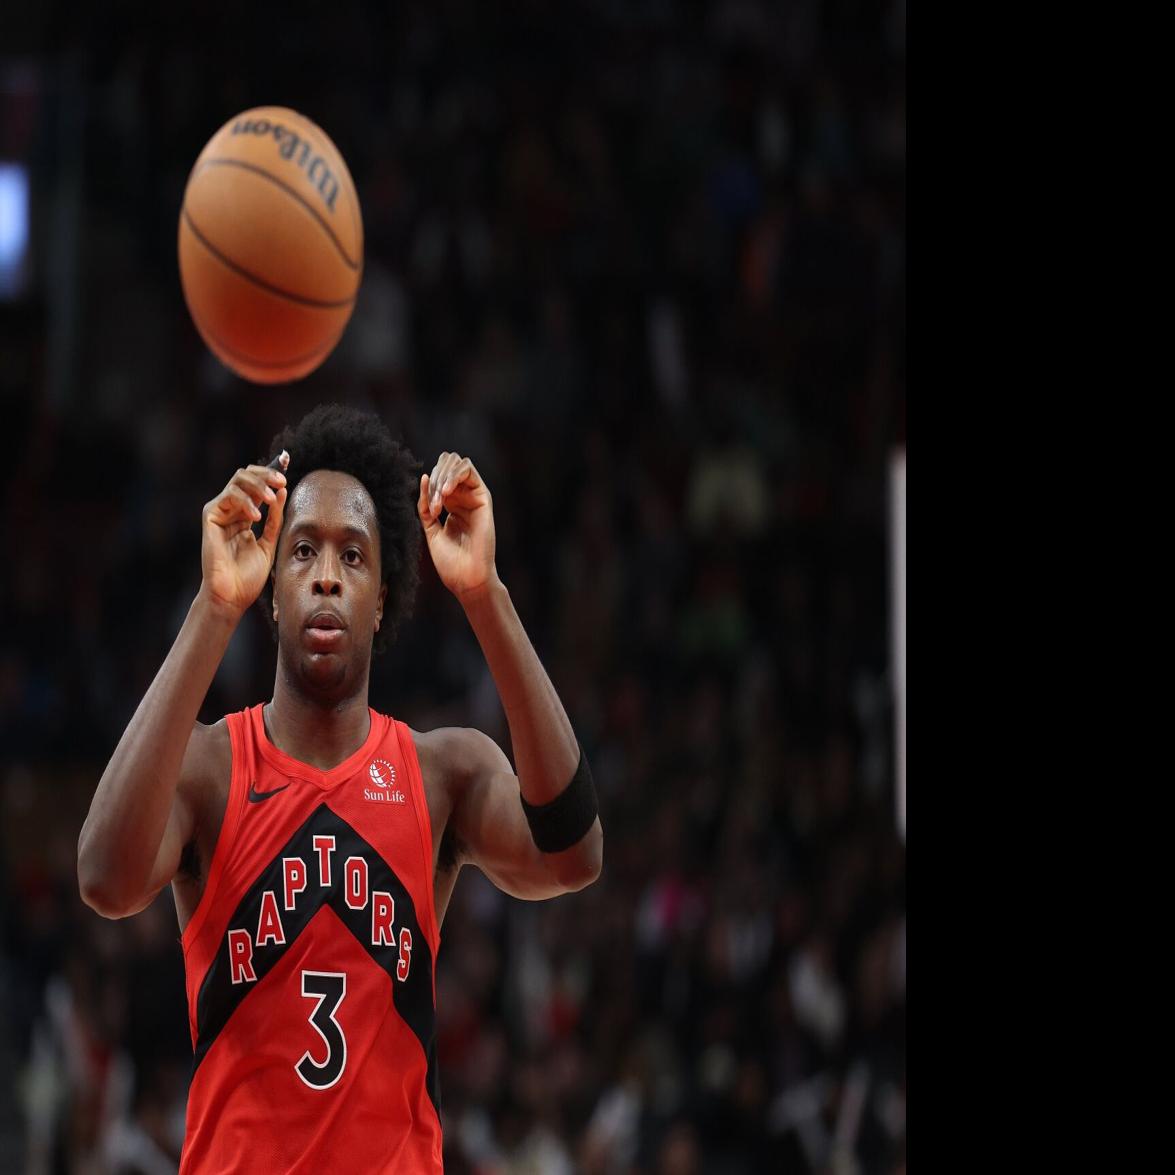 Knicks willing to pay high price for Raptors' OG Anunoby